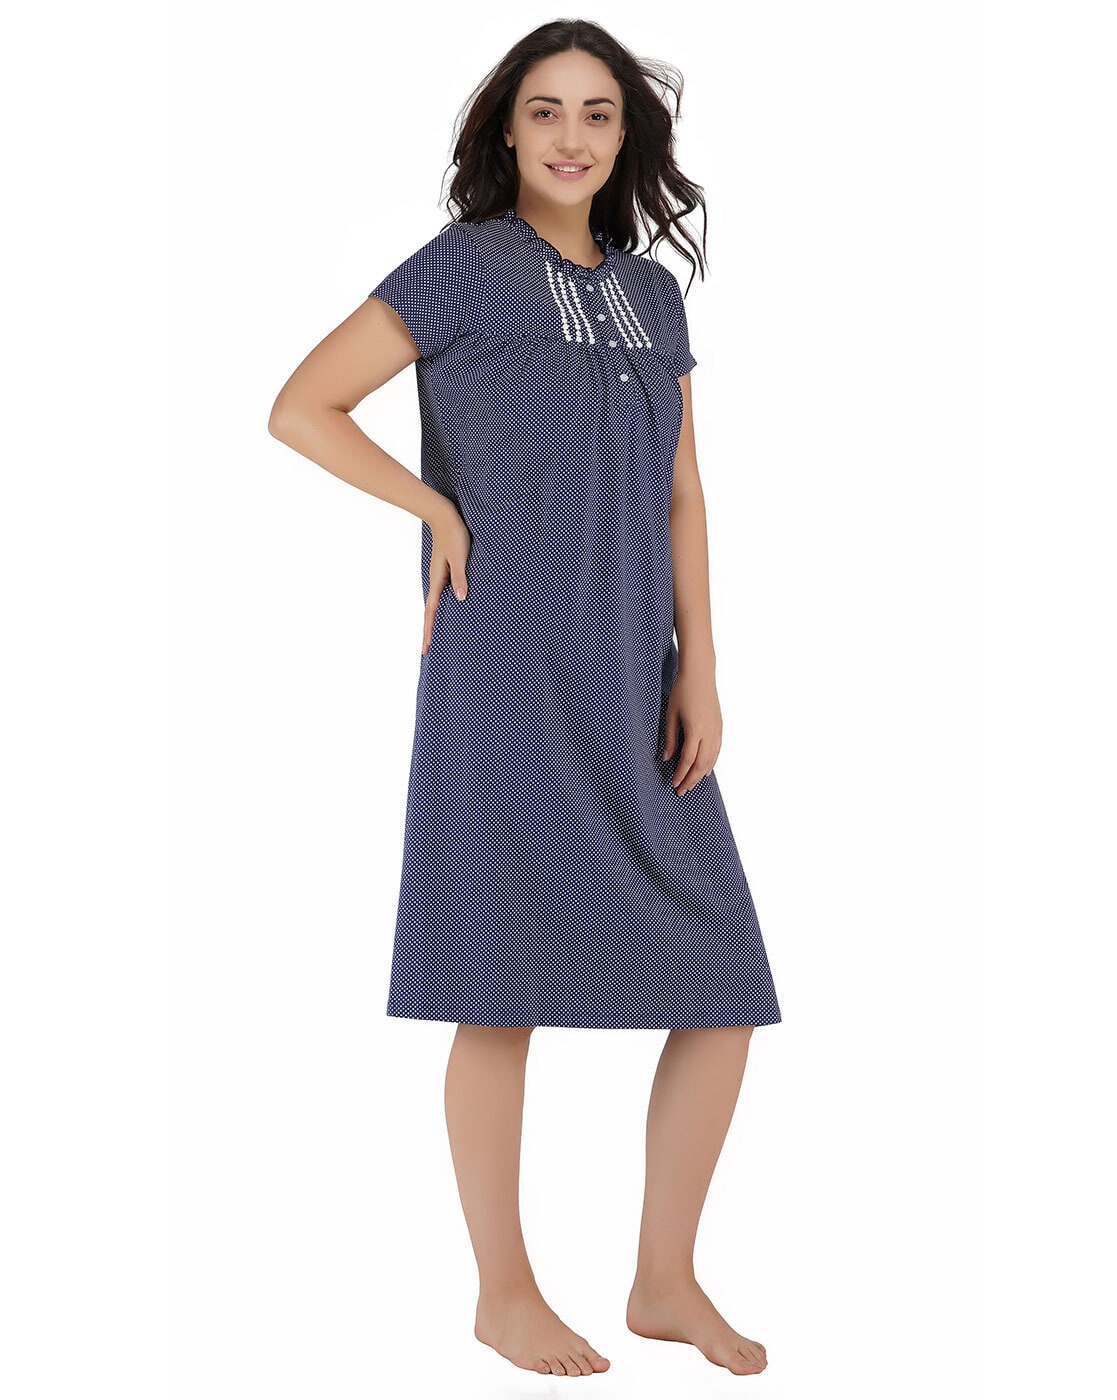 Navy Spot Nightdress with Polka Dot Edging and Bow Detail